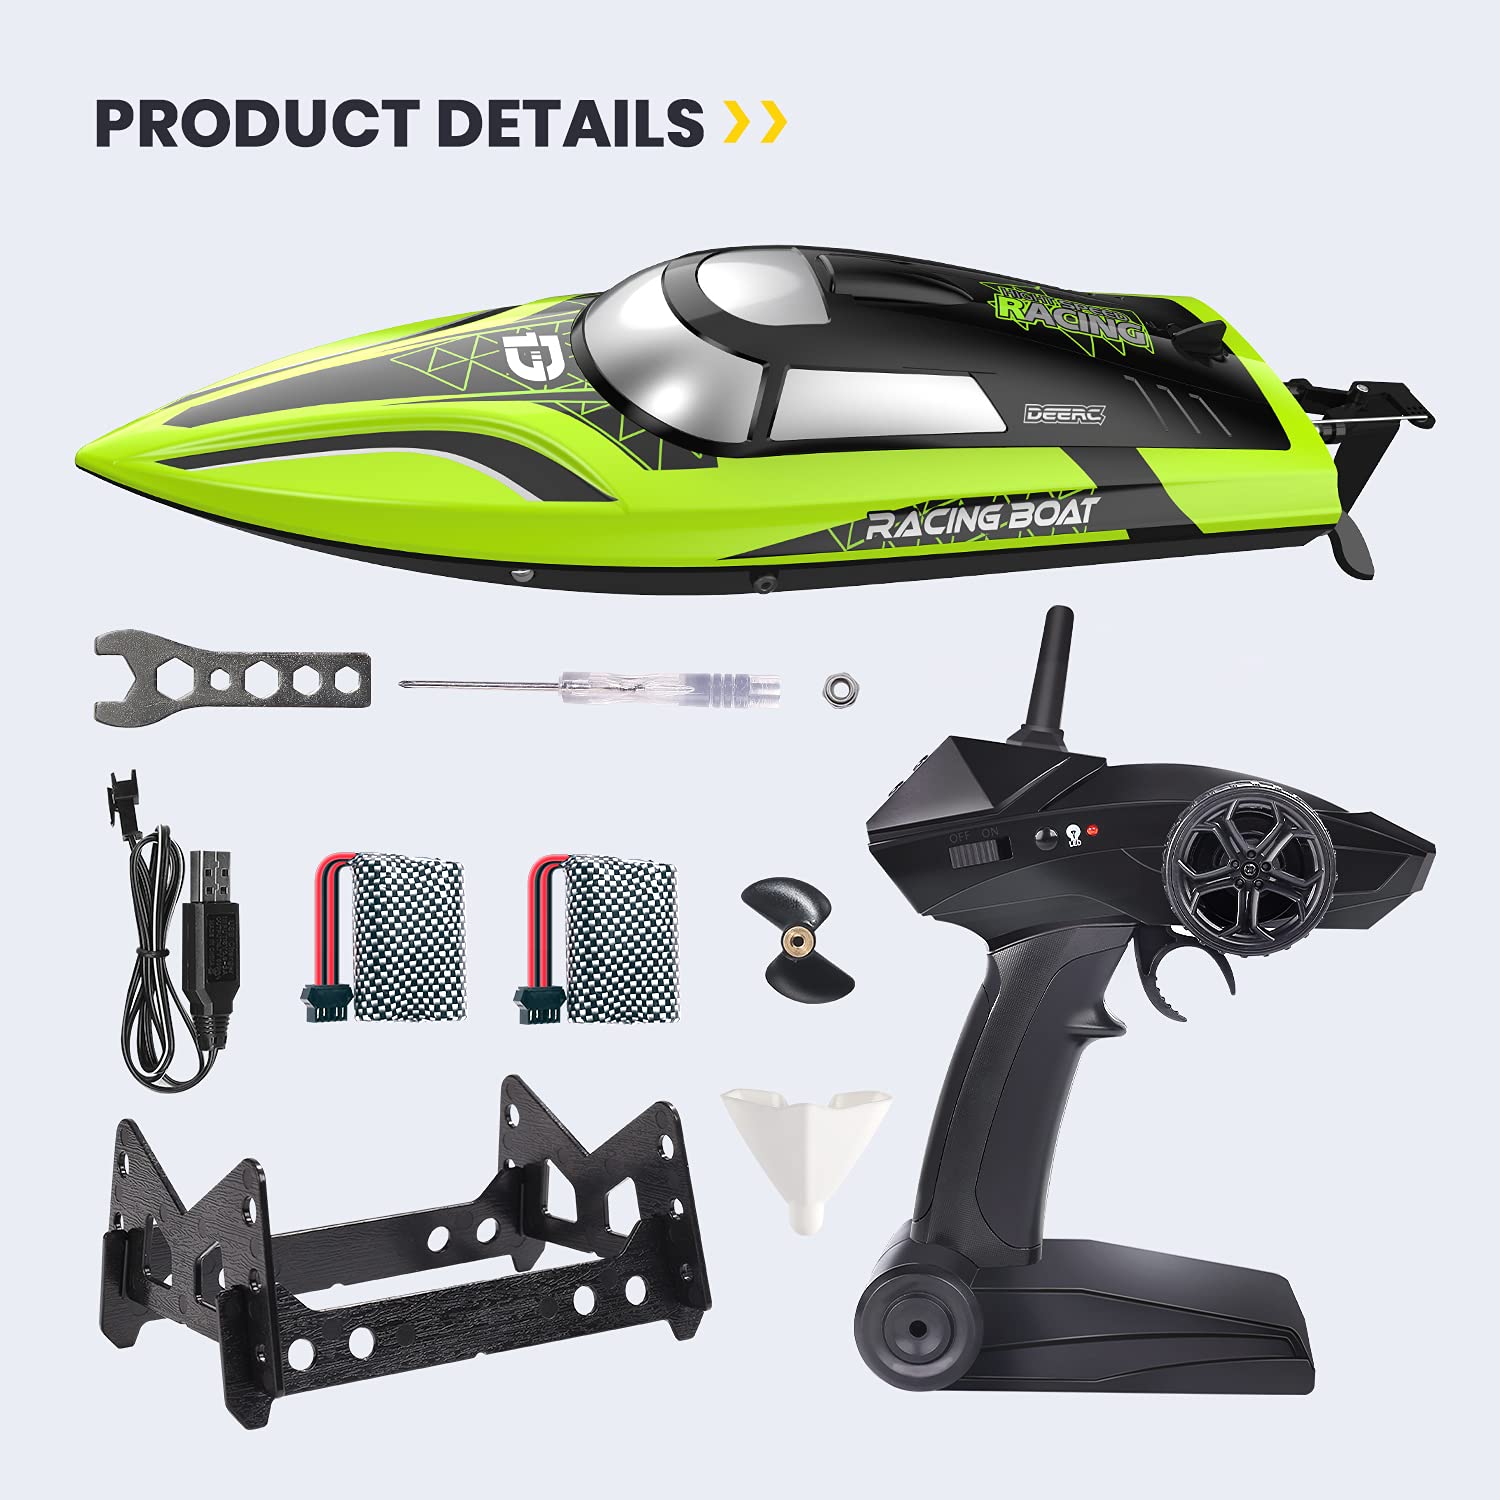 DEERC RC Boat with LED Light, 30+ Mins, Self Righting Remote Control Boat for Pools & Lakes, 20+ MPH, 2.4GHz Racing Boats, 2 Battery, Pool Toys for Kids, Radio Controlled Watercraft